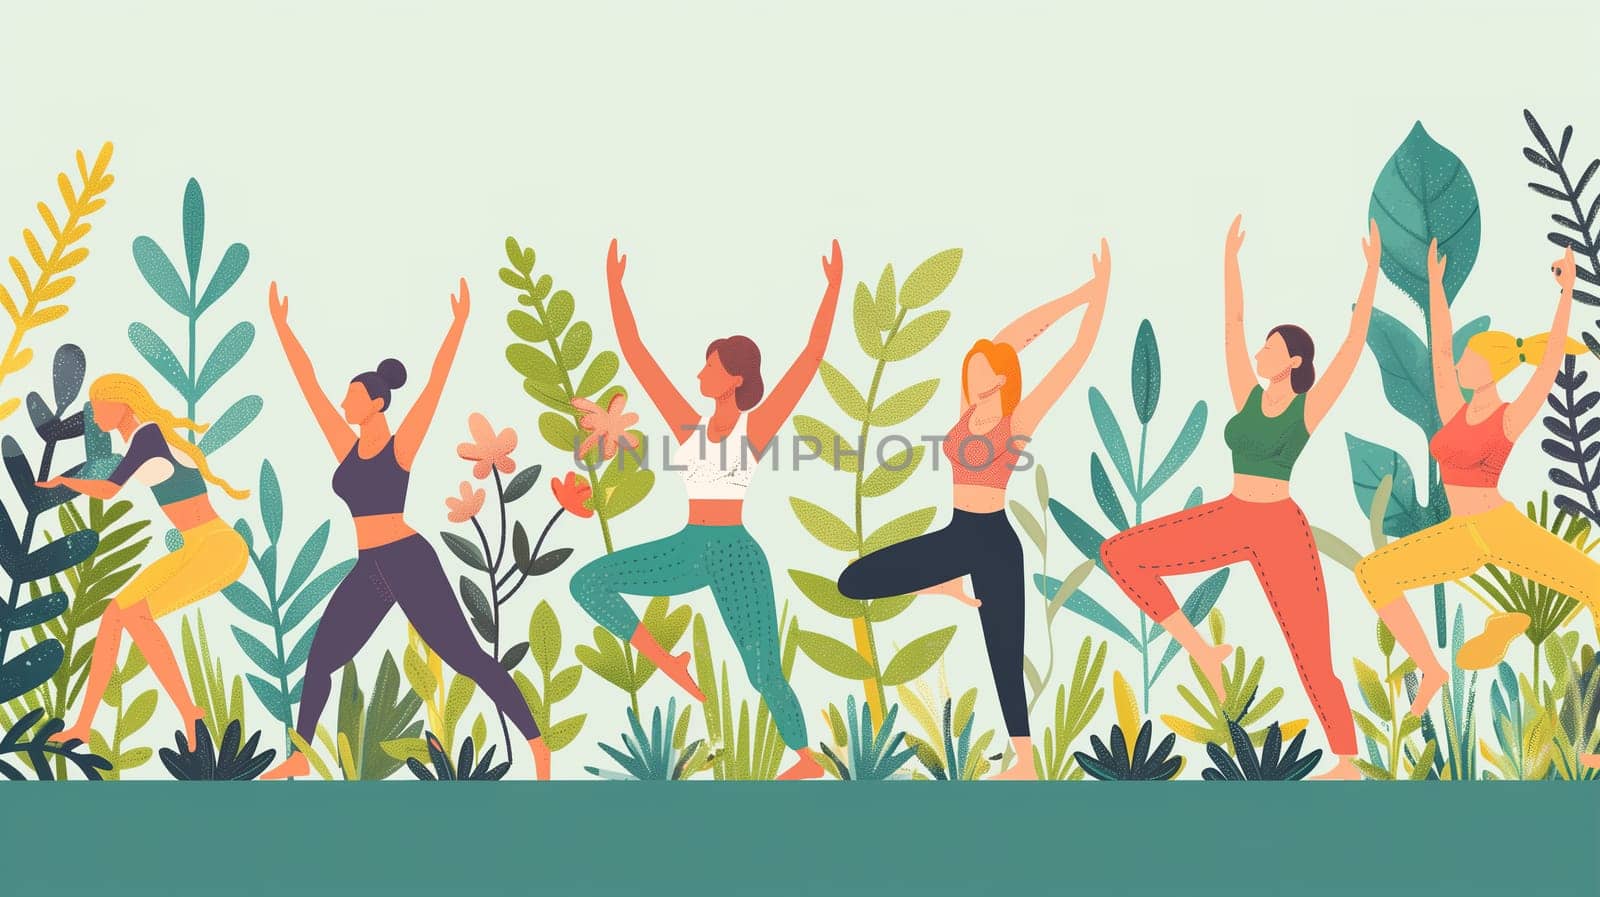 Several individuals engaged in various yoga poses in a grassy field under a clear sky. They are focused and concentrated on their movements and breath, finding inner peace and strength through their practice.